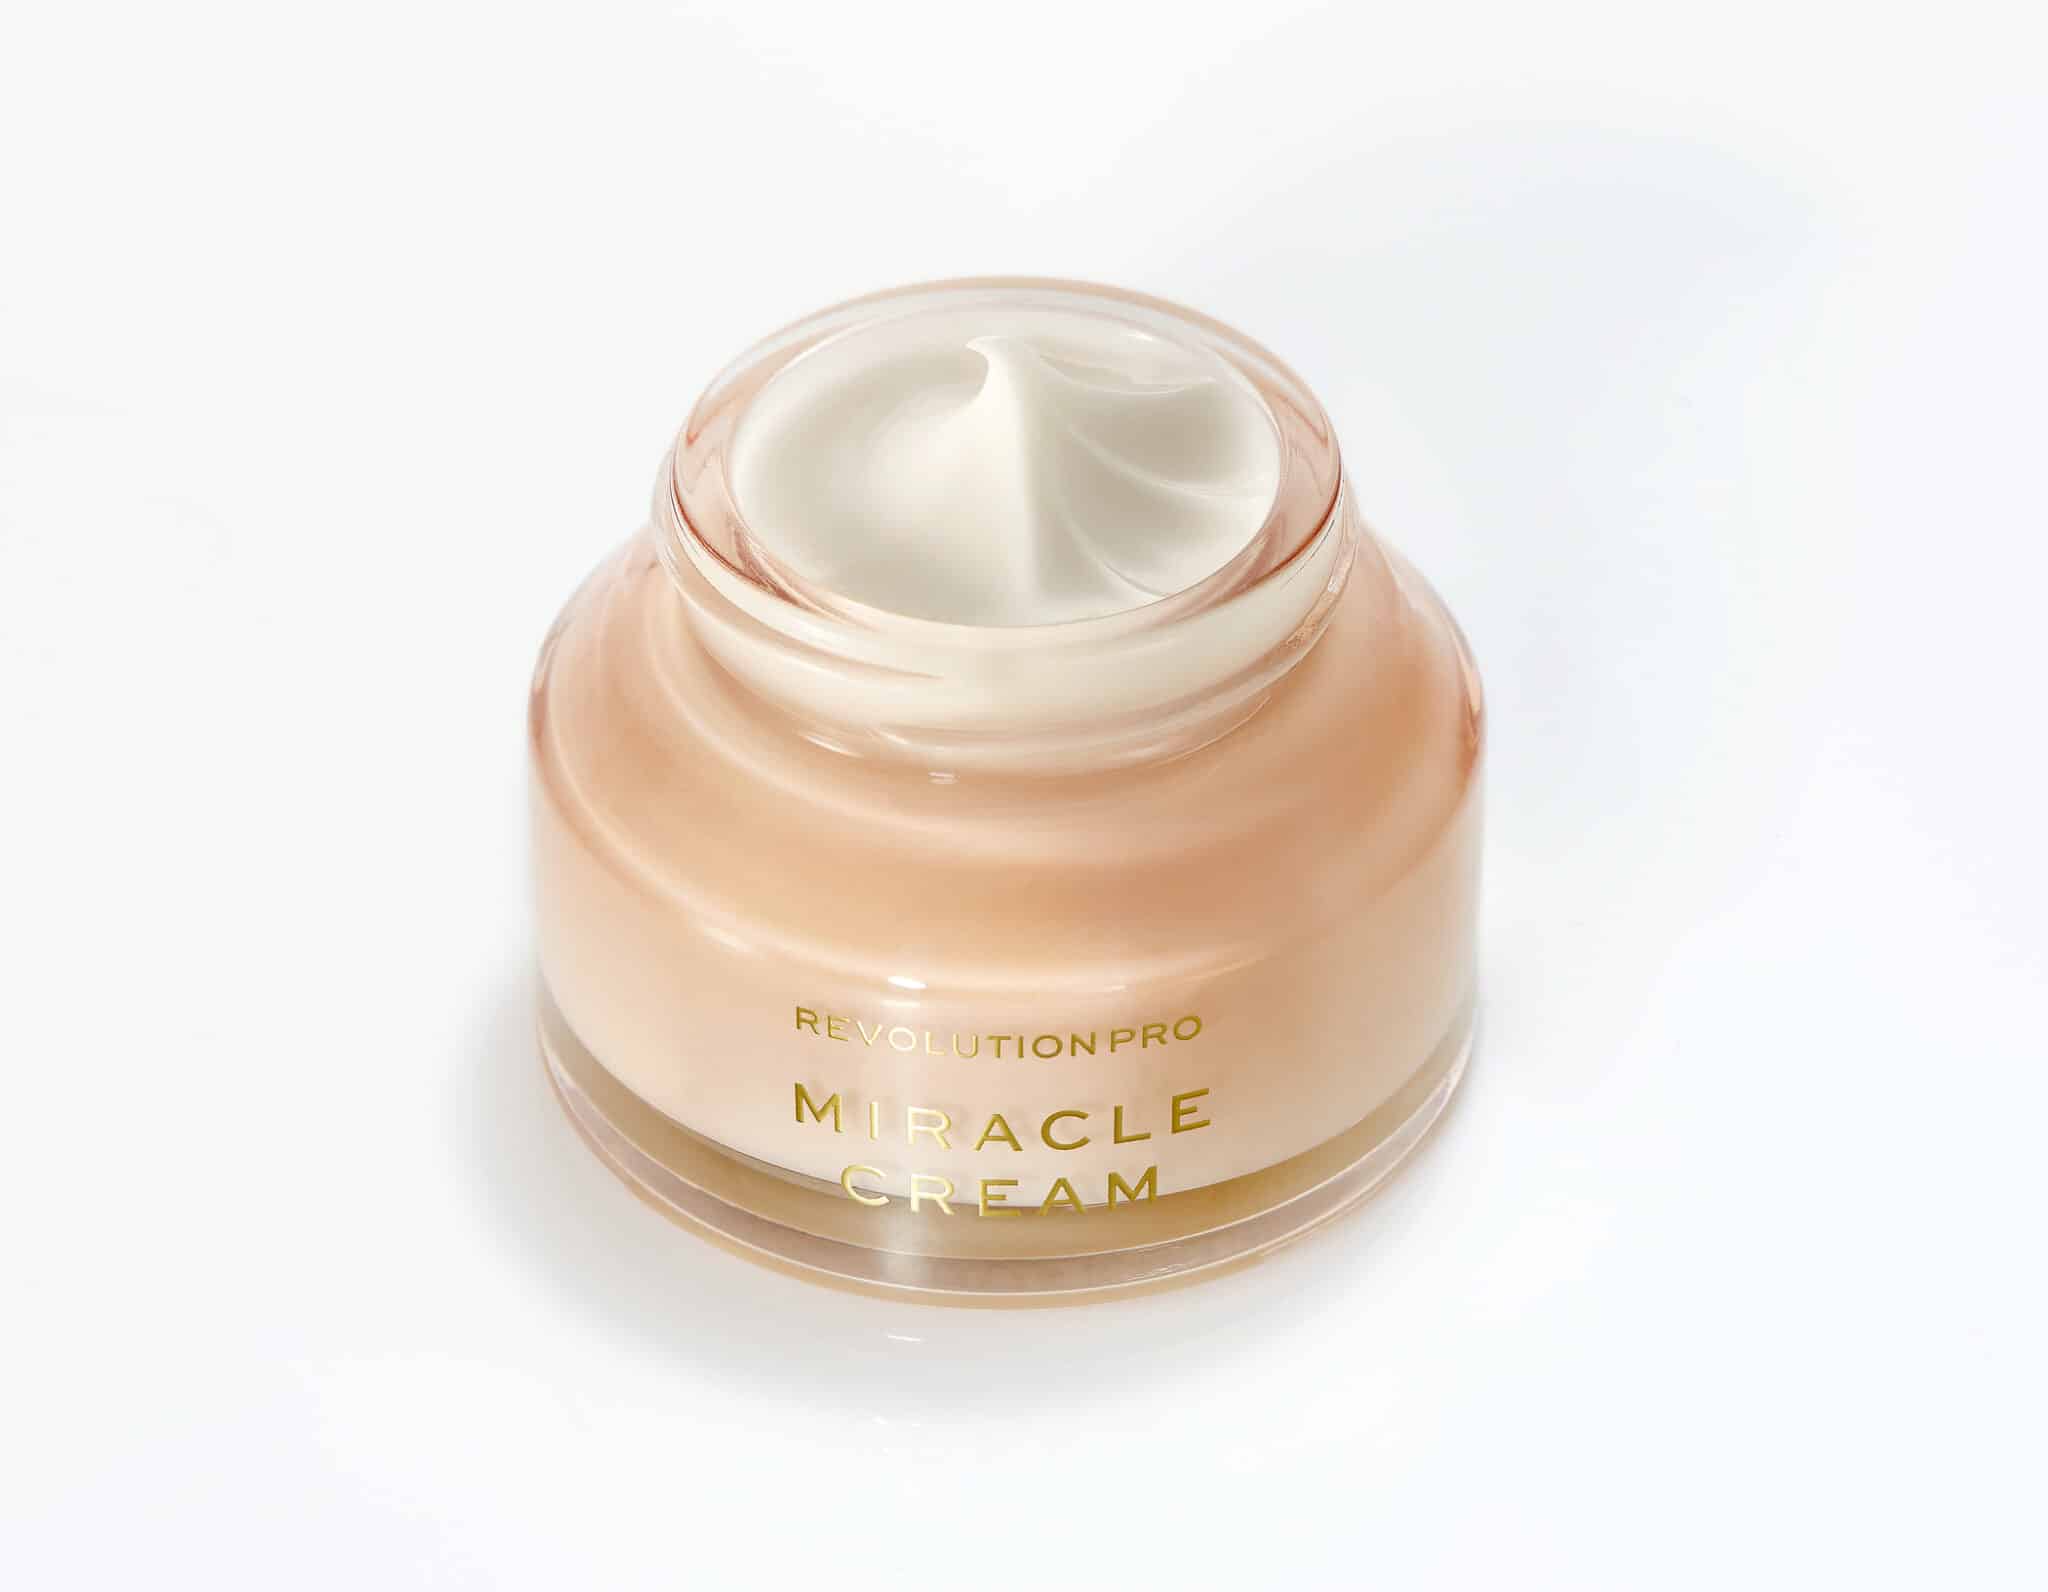 The Revolution Pro Miracle Cream has a waitlist of more than 10,000 people.